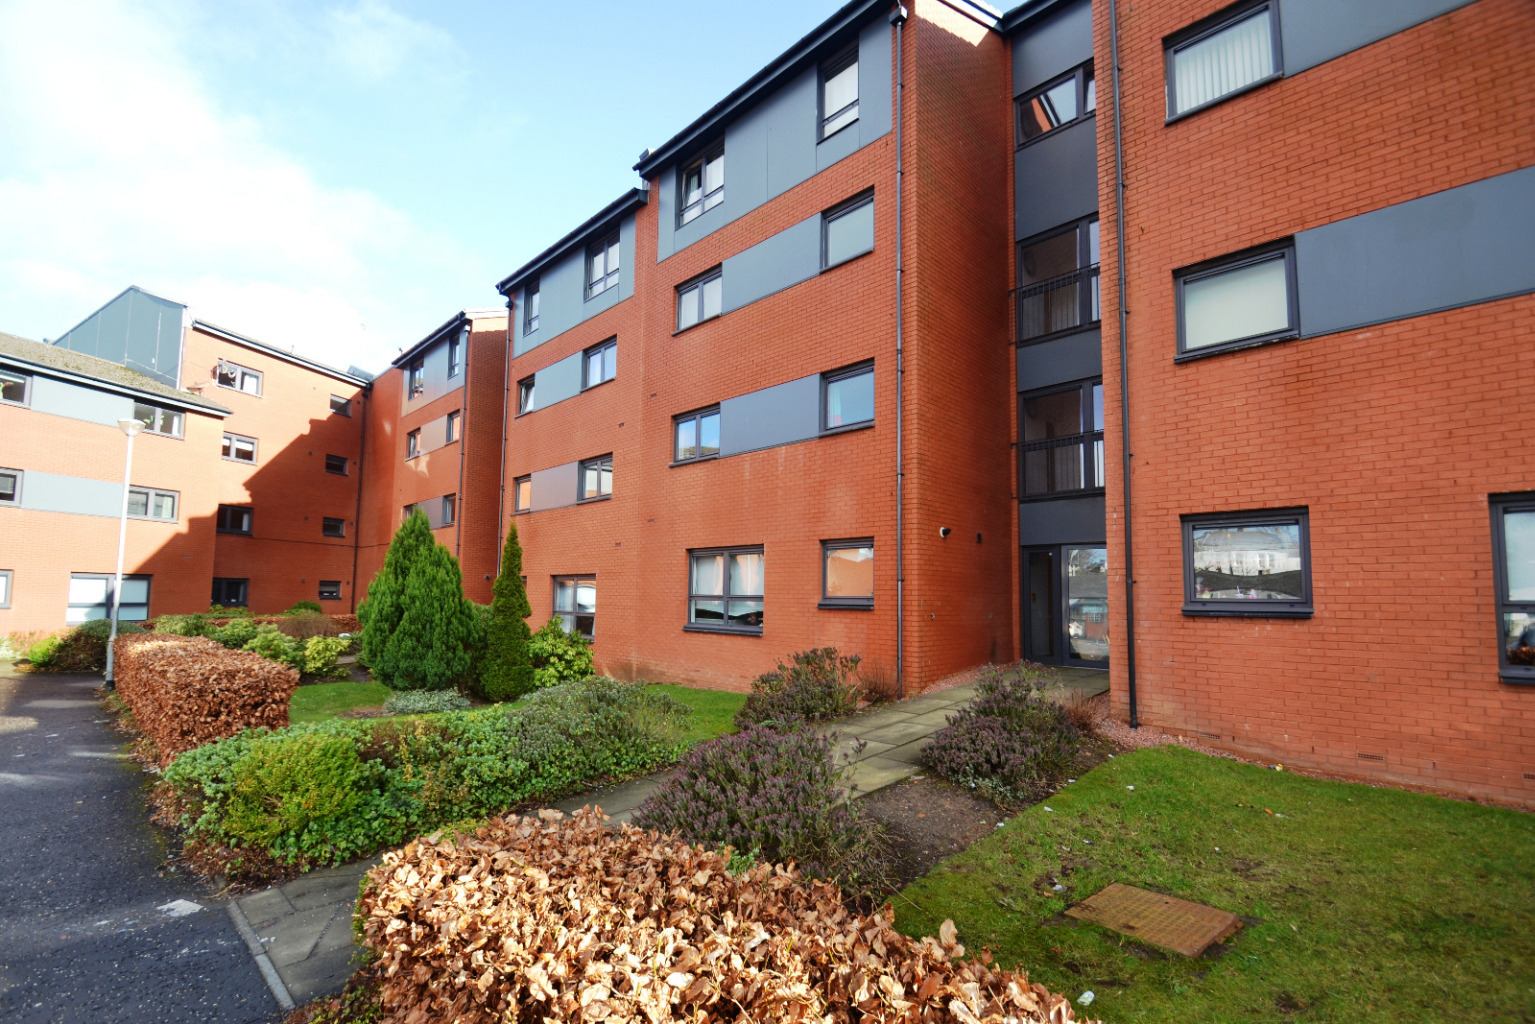 2 bed flat for sale in Clarkston Road, Glasgow - Property Image 1